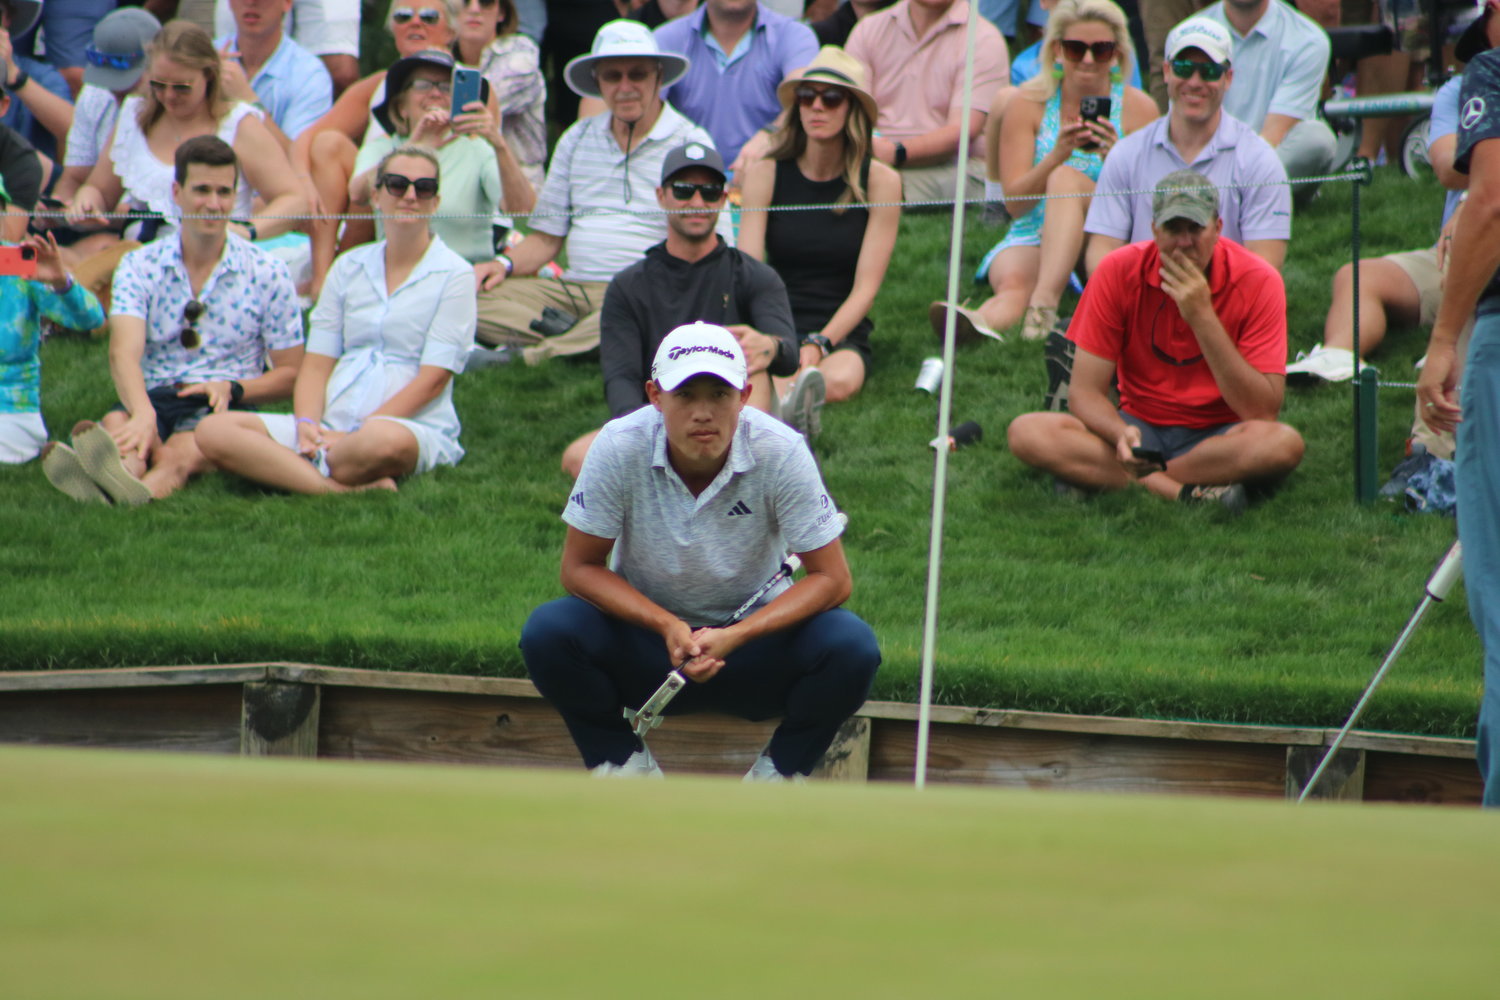 Collin Morikawa contemplates a potential putt as fans watch on during second round action at the 2023 Players Championship.